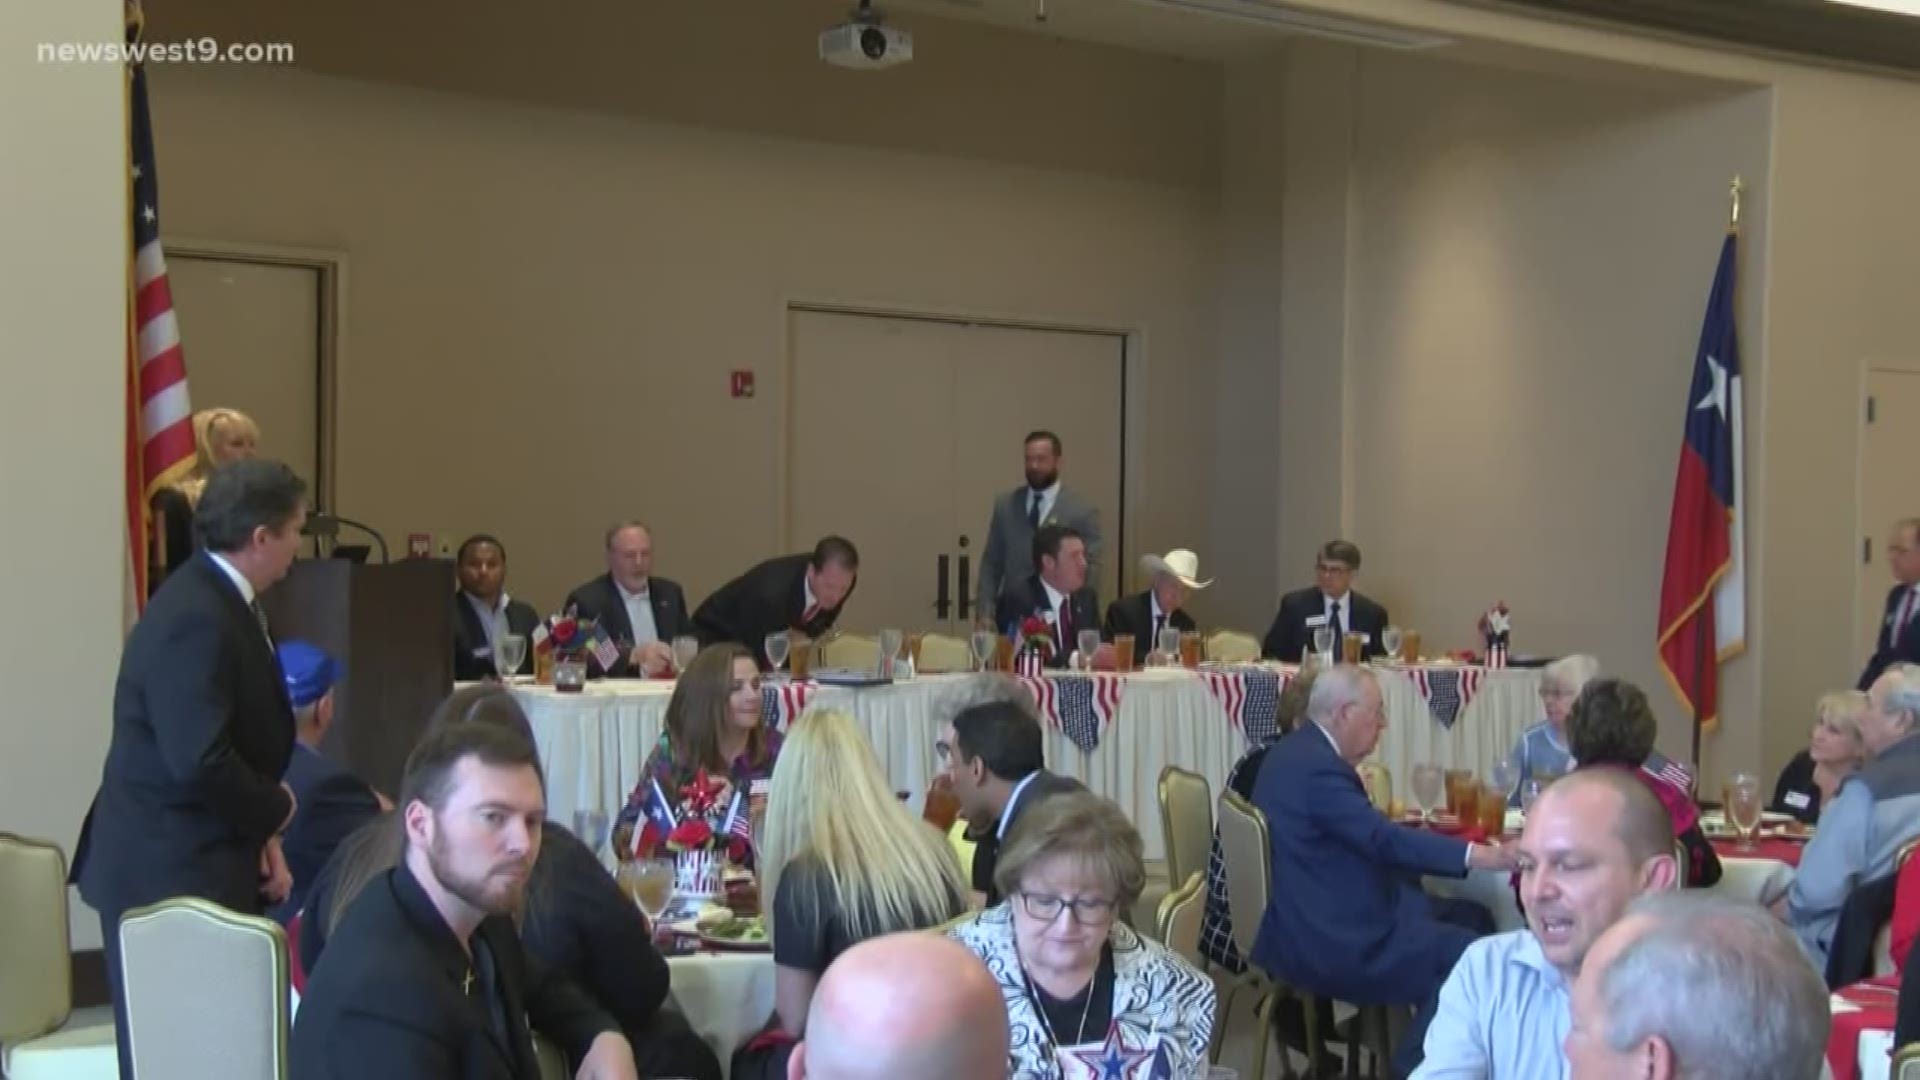 Ector County Republican Women's Club was recently named the number one Republican club in the nation.